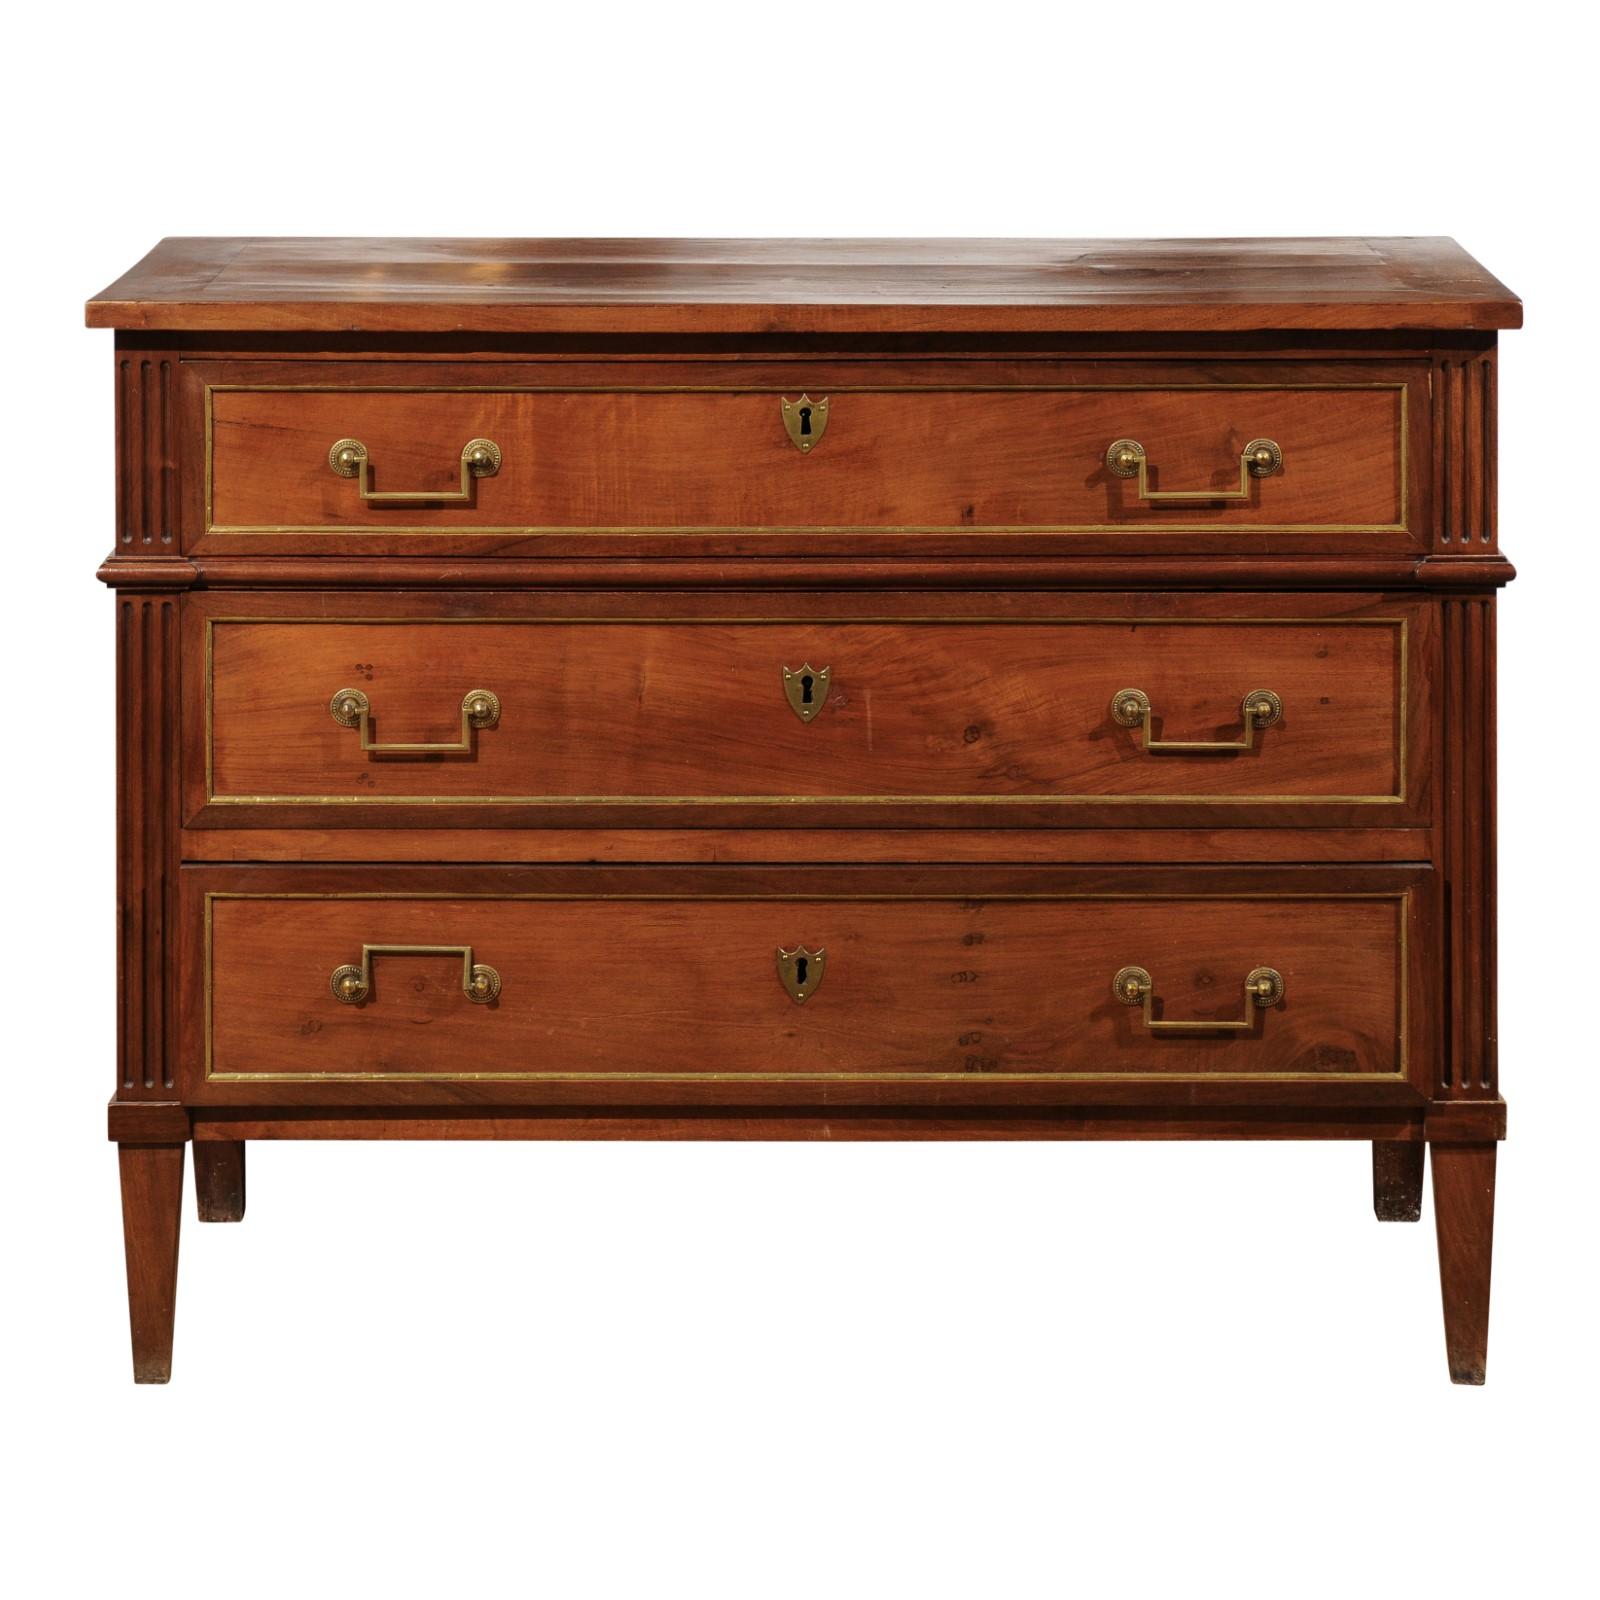 French Louis XVI Style 1840s Walnut Three-Drawer Commode with Brass Accents